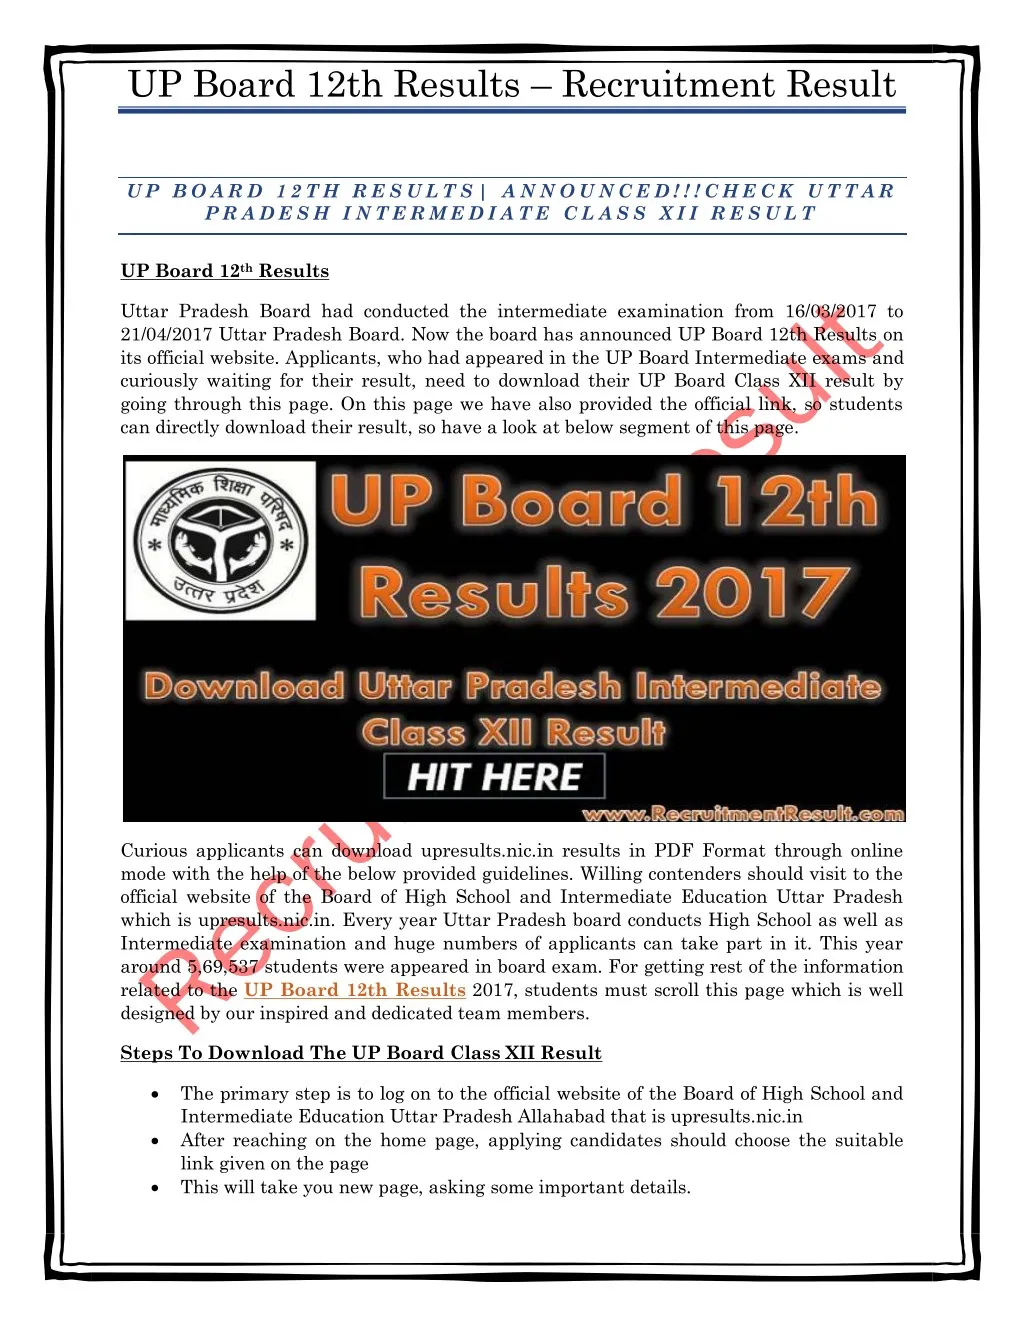 up board 12th results recruitment result